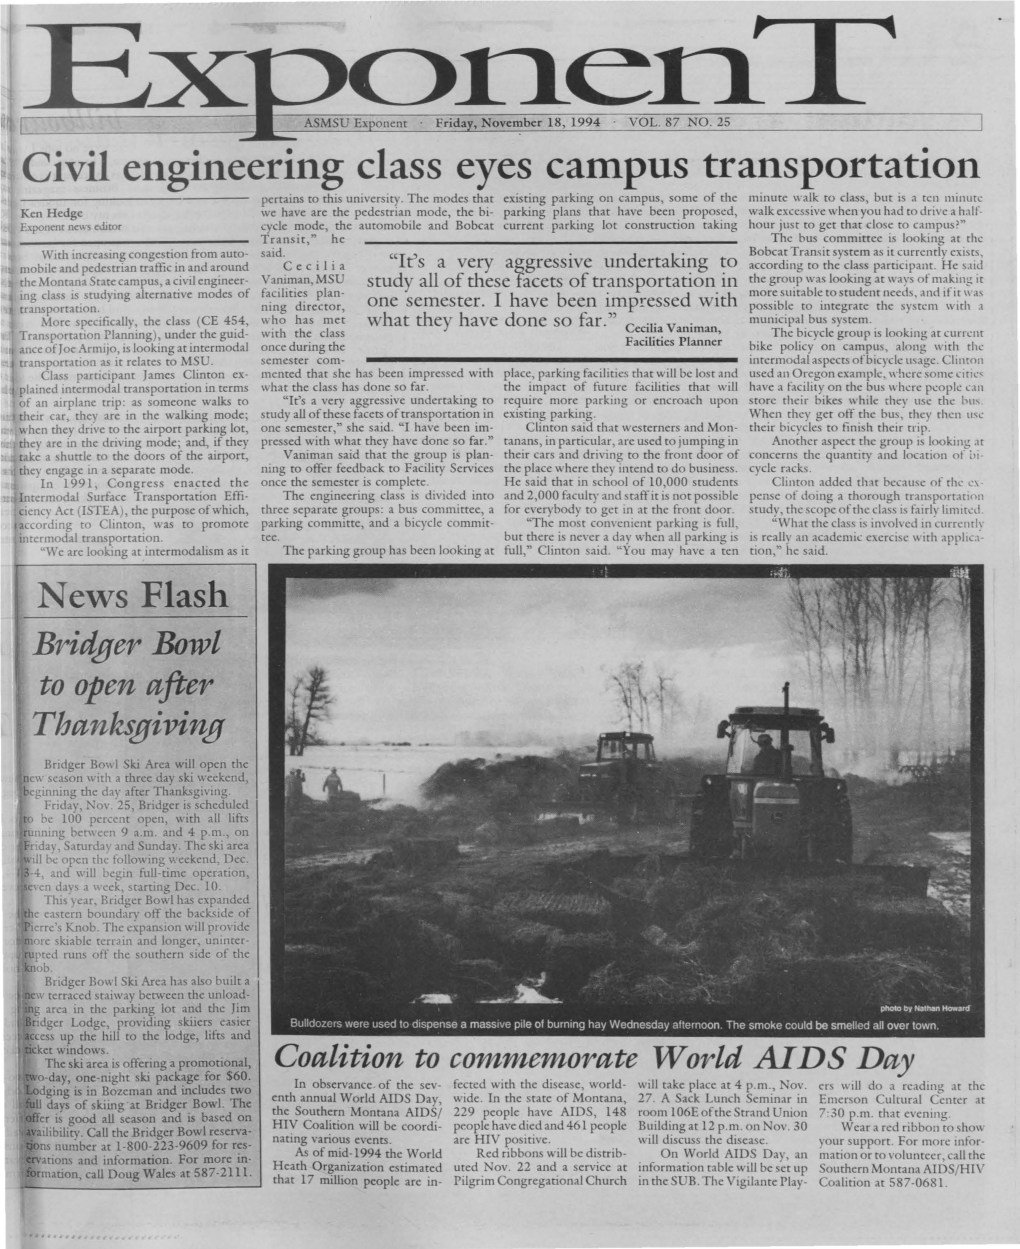 Civil Engineering Class Eyes Campus Transportation Pertains to This University